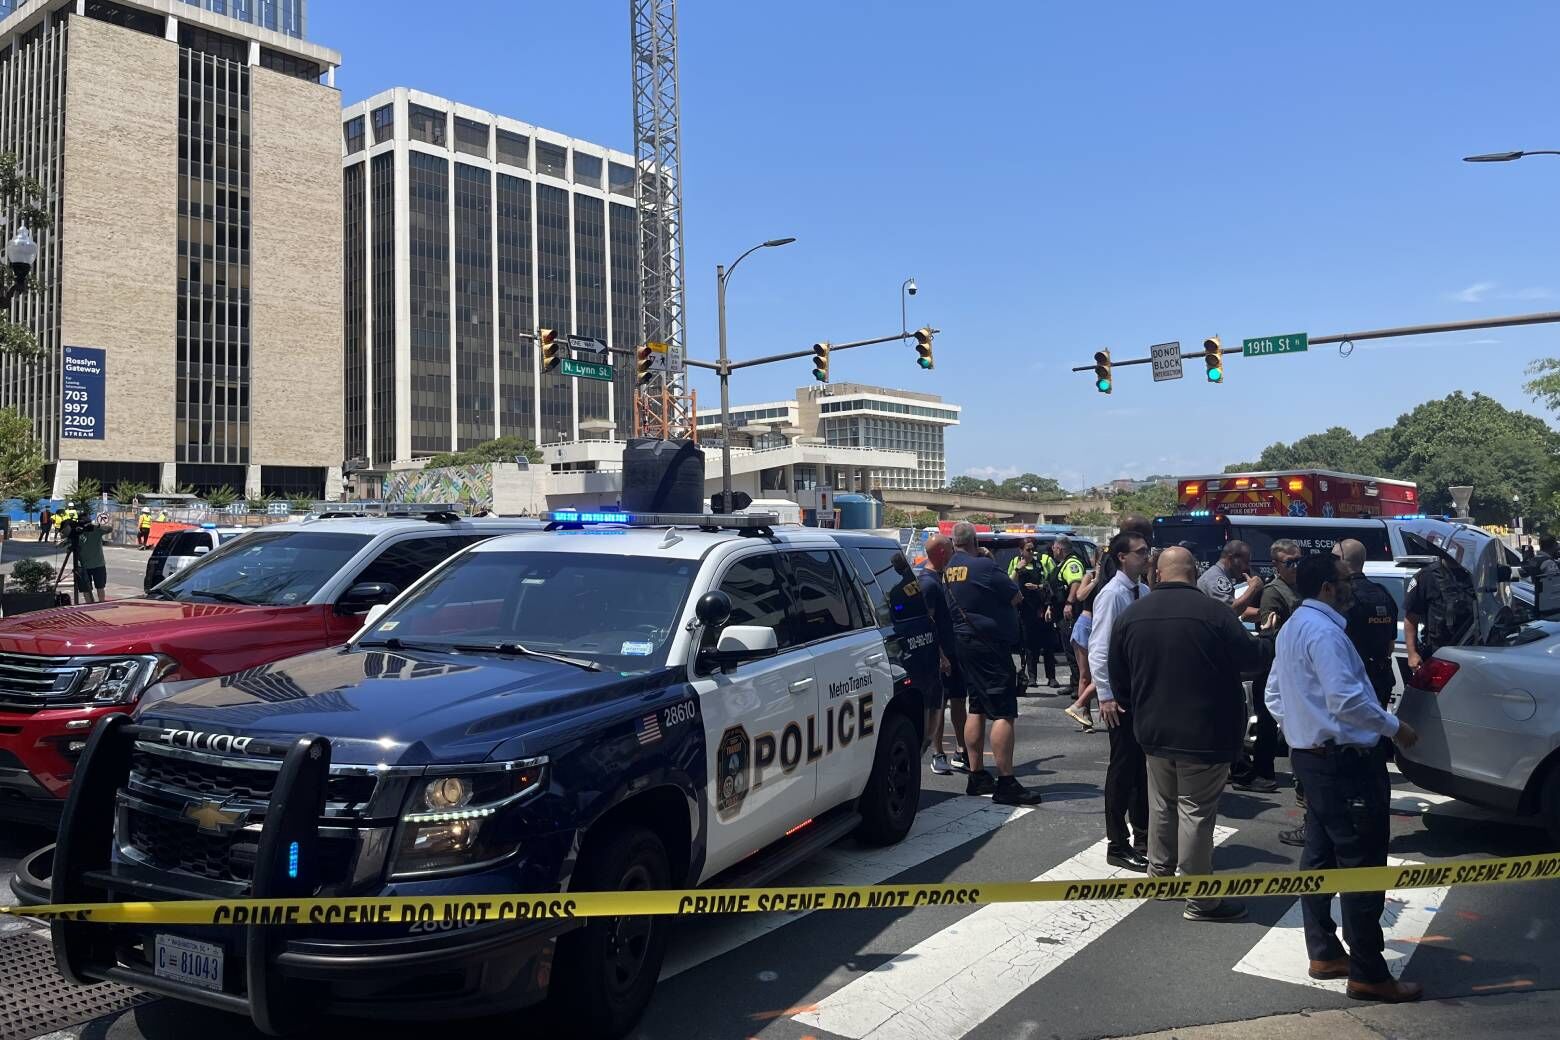 A person suspected of a series of carjackings in the Rosslyn area was wounded in a shooting involving a Metro Transit Police officer, police said Friday. (WTOP/Ana Golden)